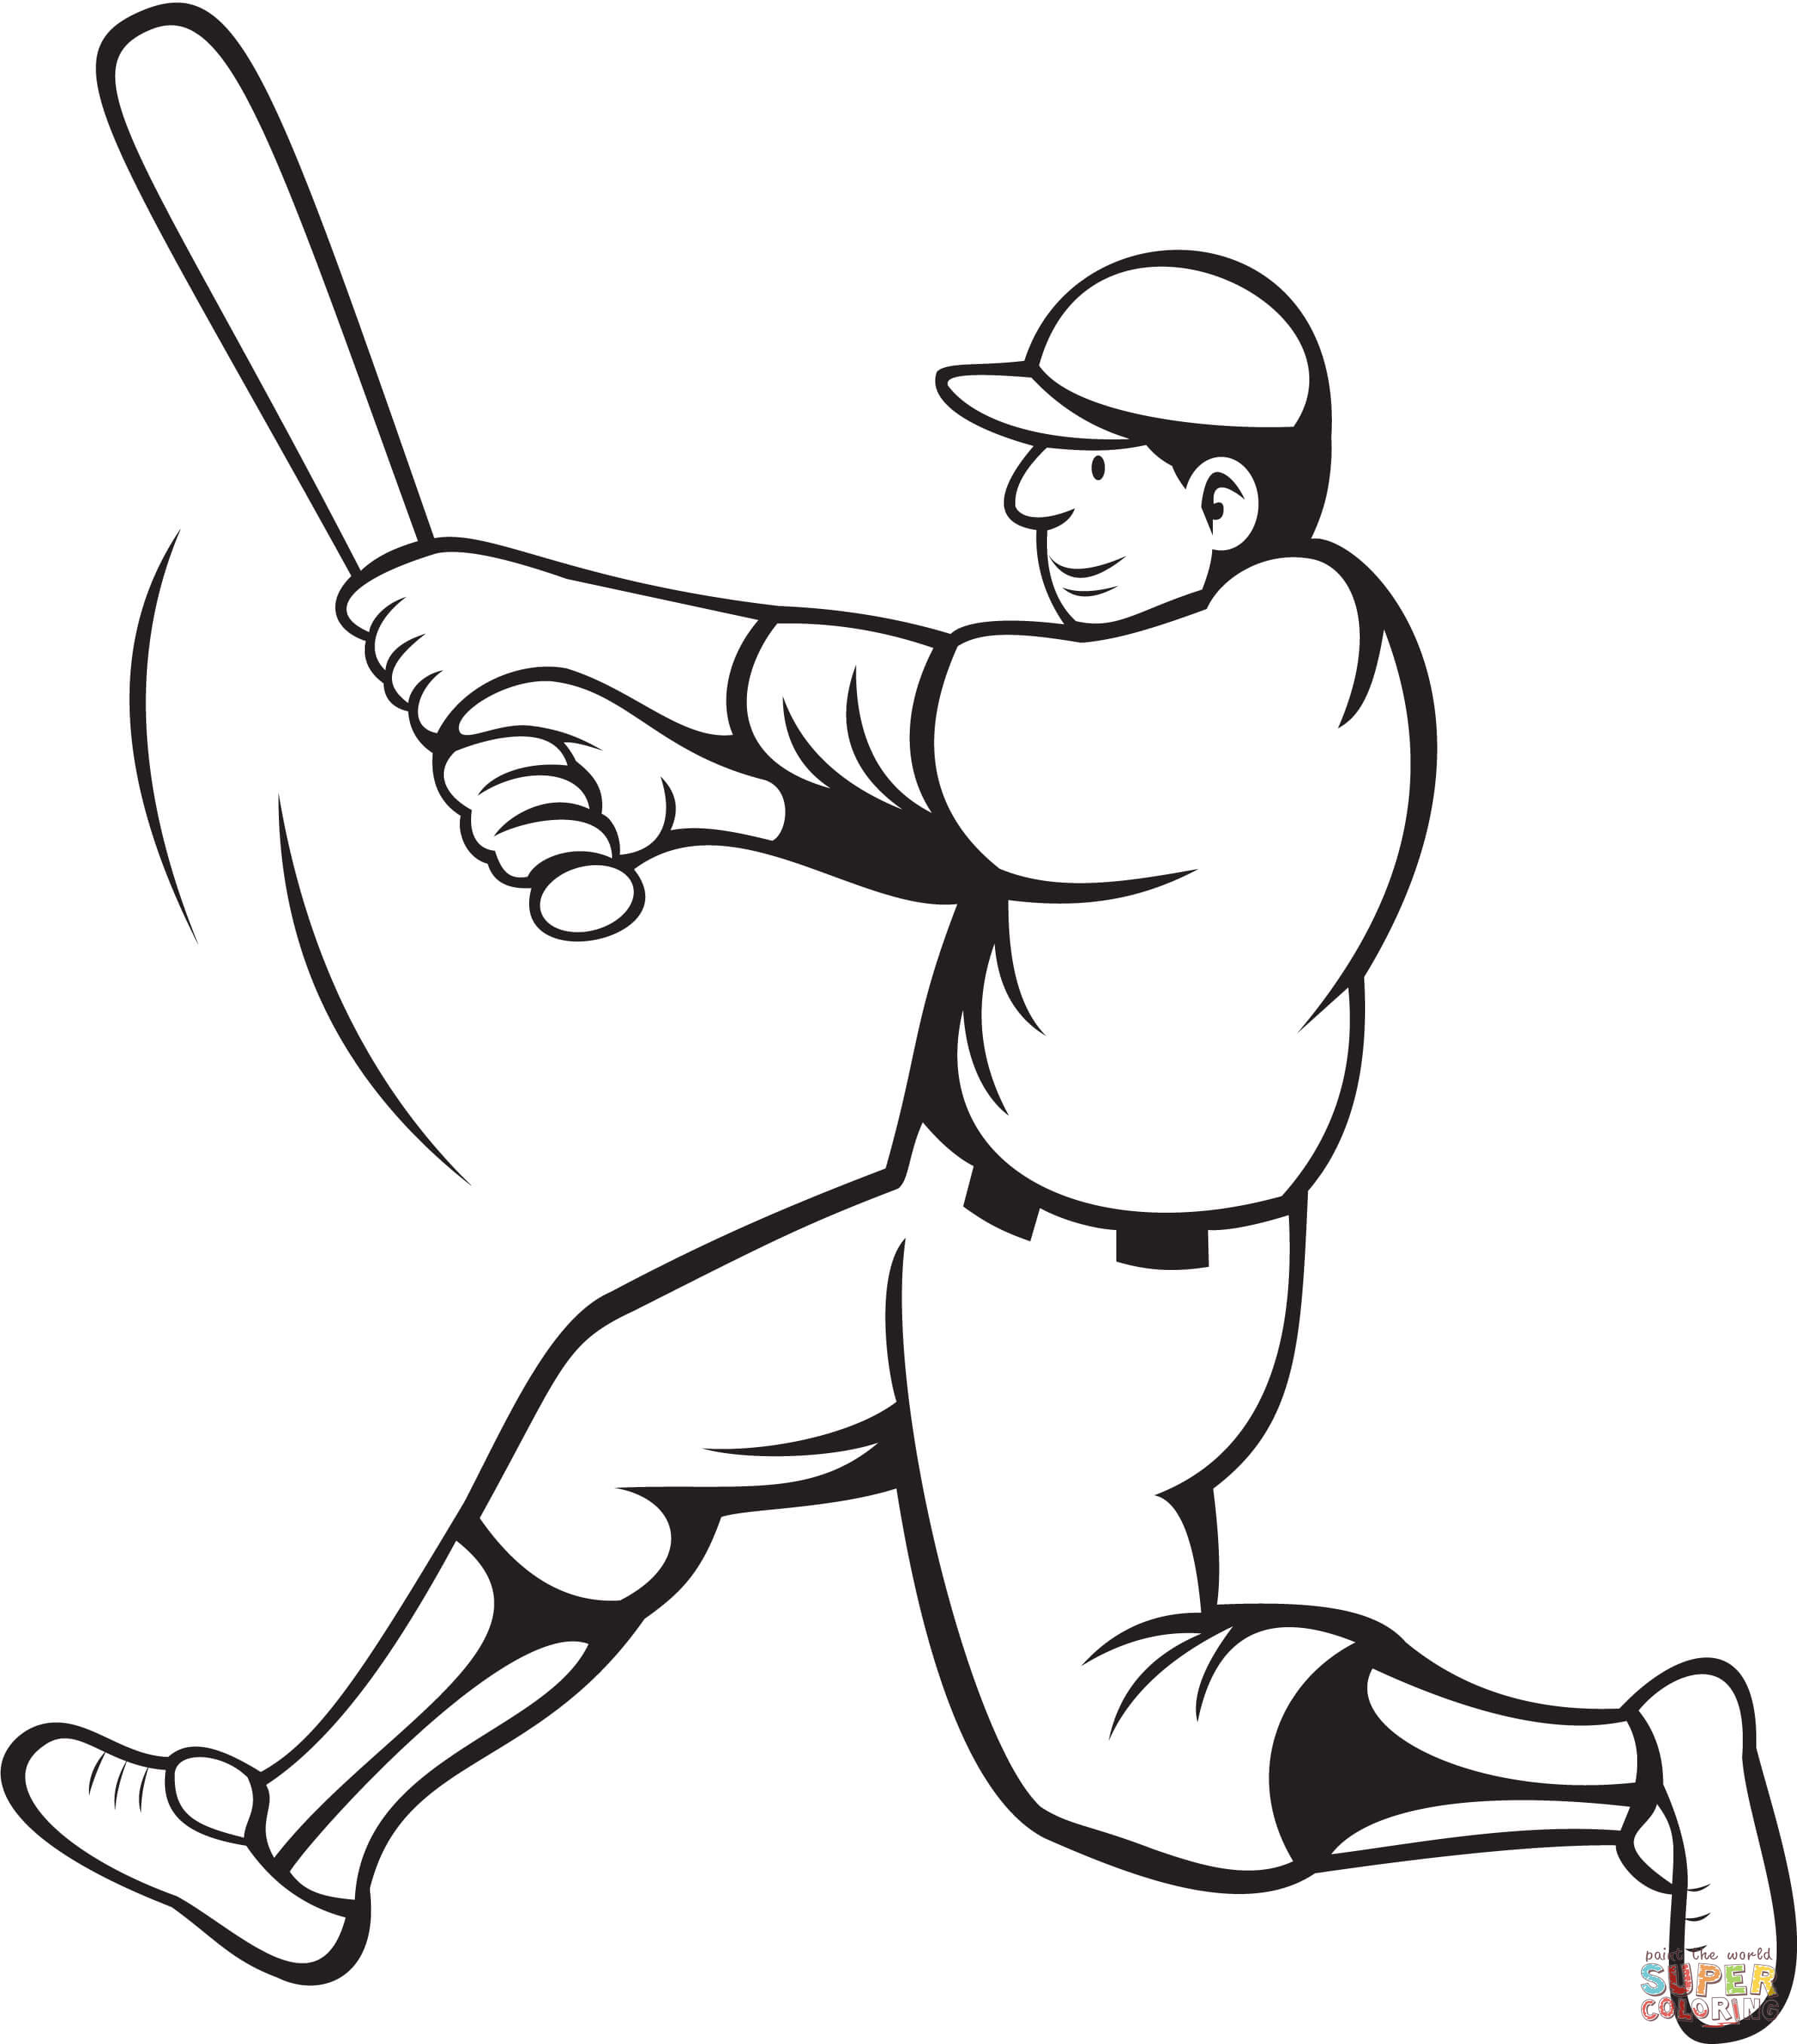 218 Cartoon Cubs Coloring Pages for Adult